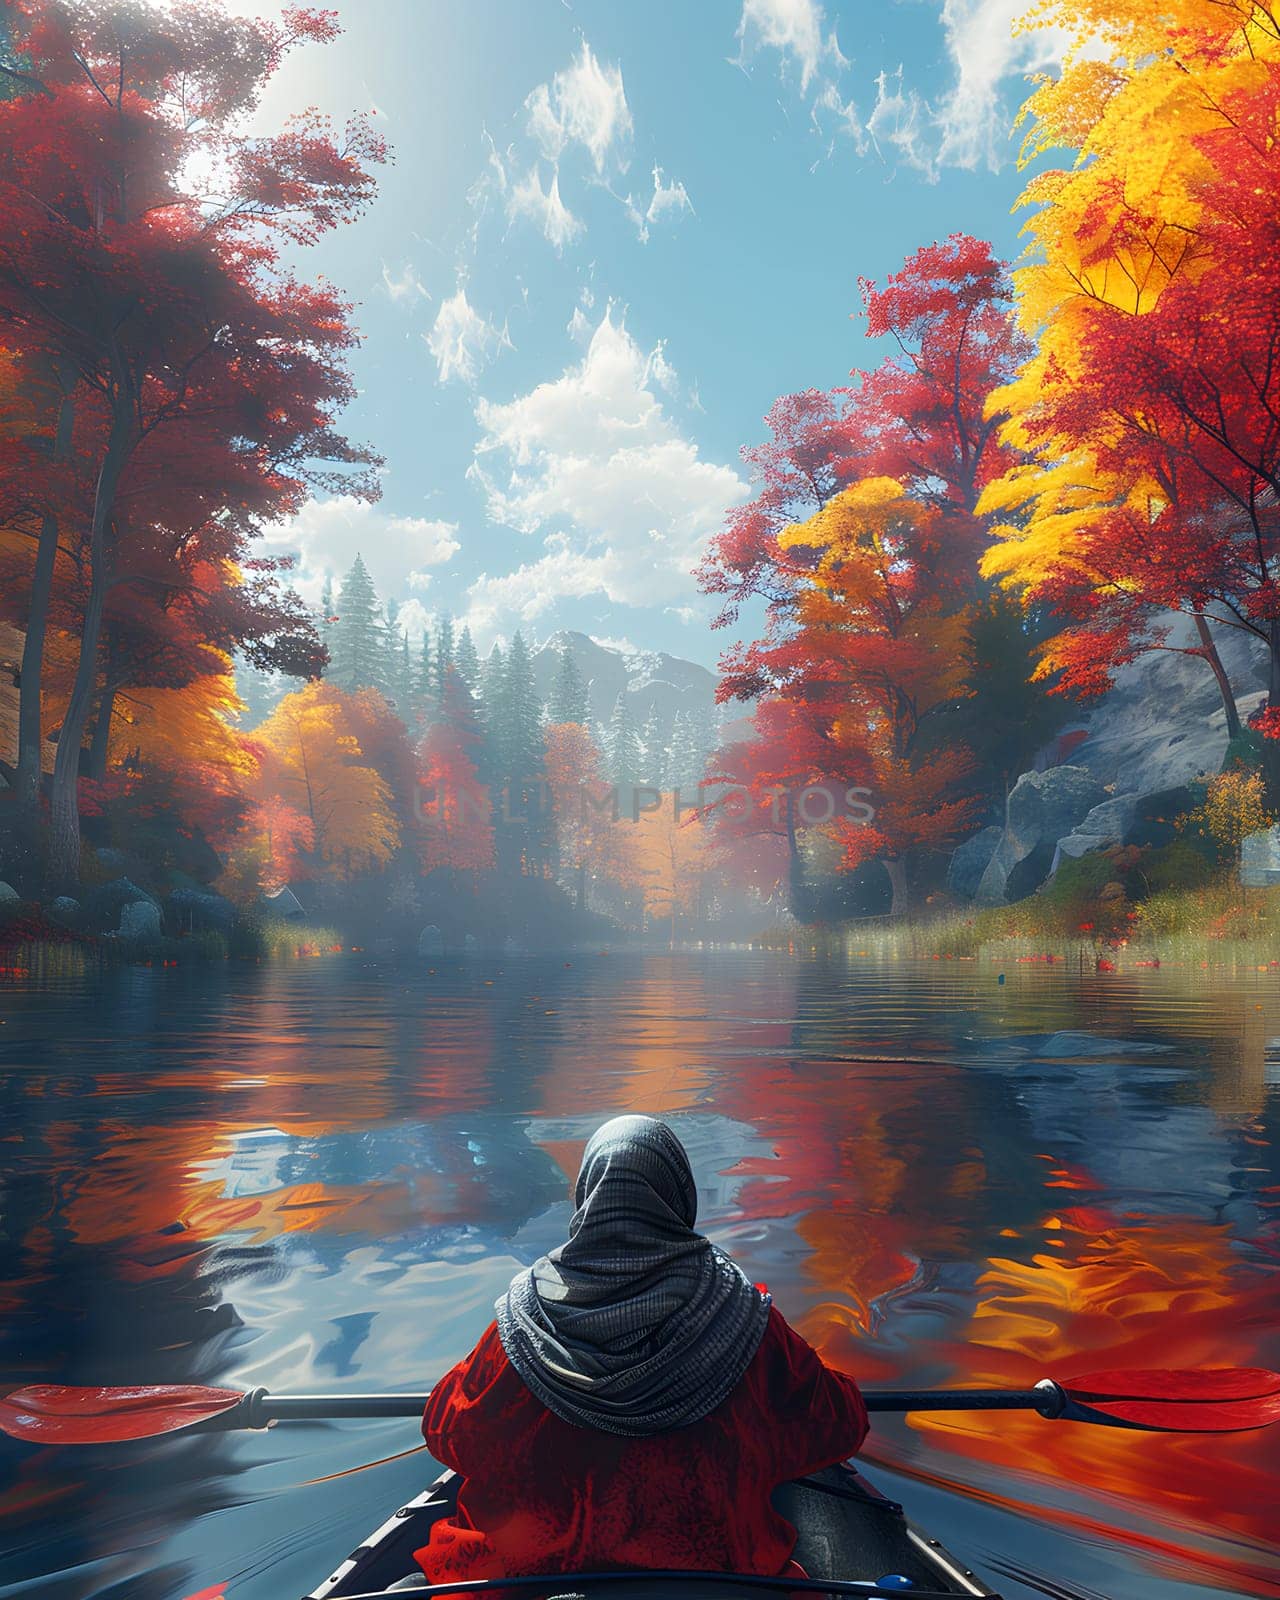 A person in a crimson jacket is gracefully navigating a canoe through the tranquil river, surrounded by lush trees under a cloudy sky